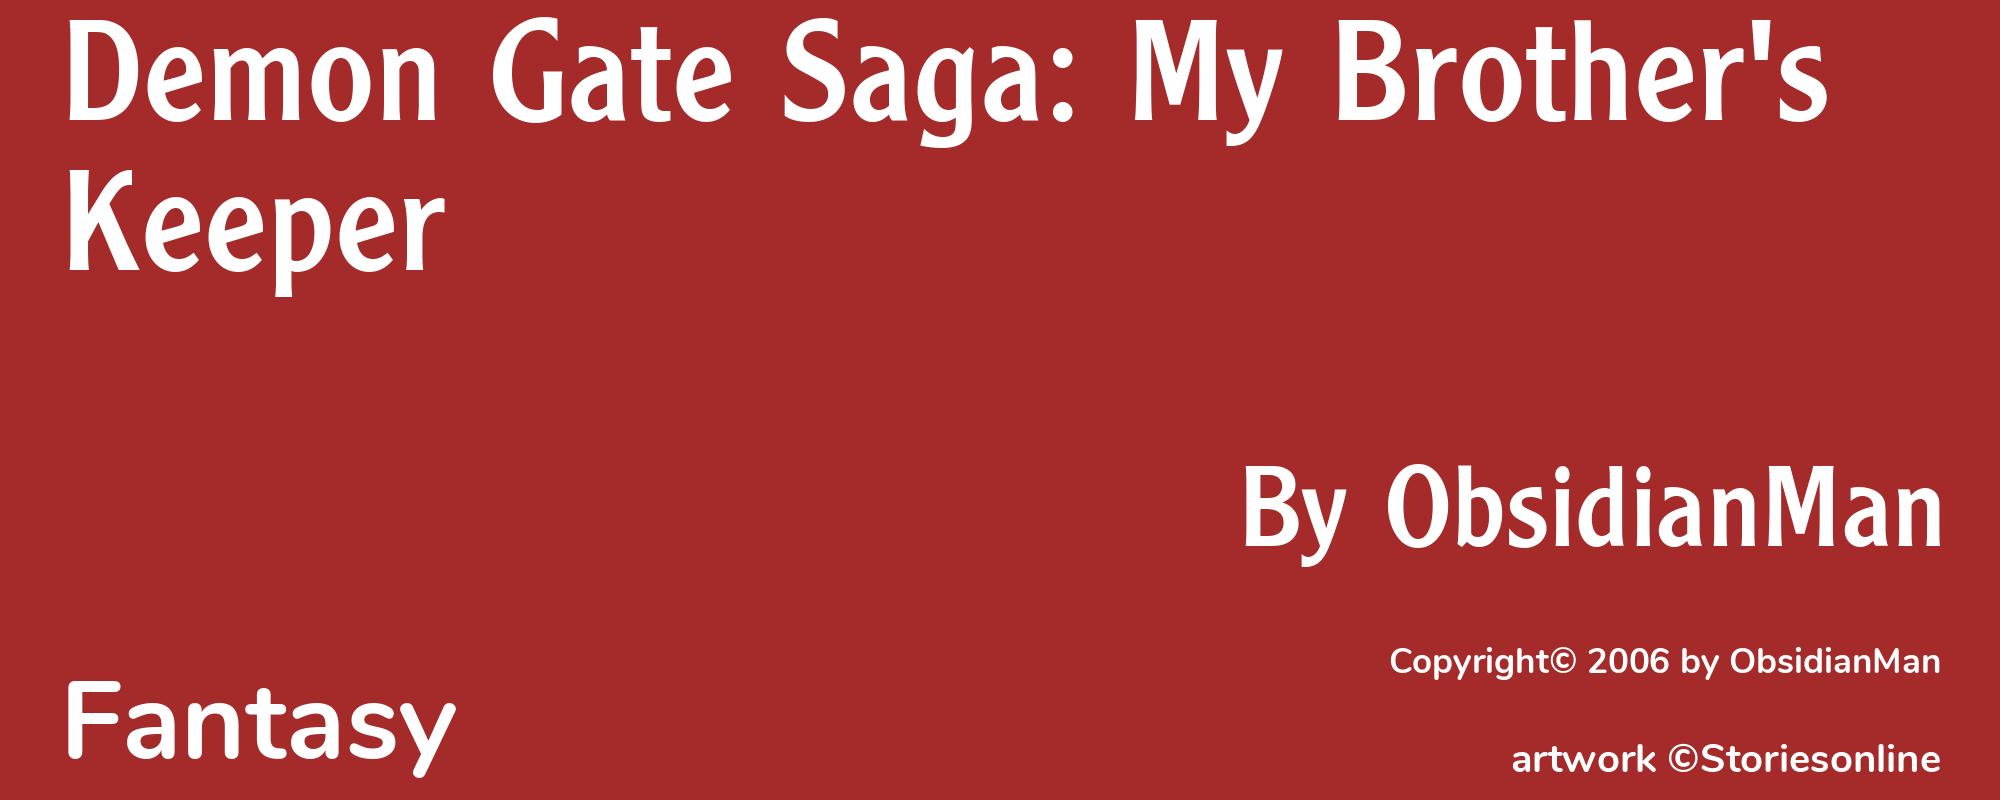 Demon Gate Saga: My Brother's Keeper - Cover